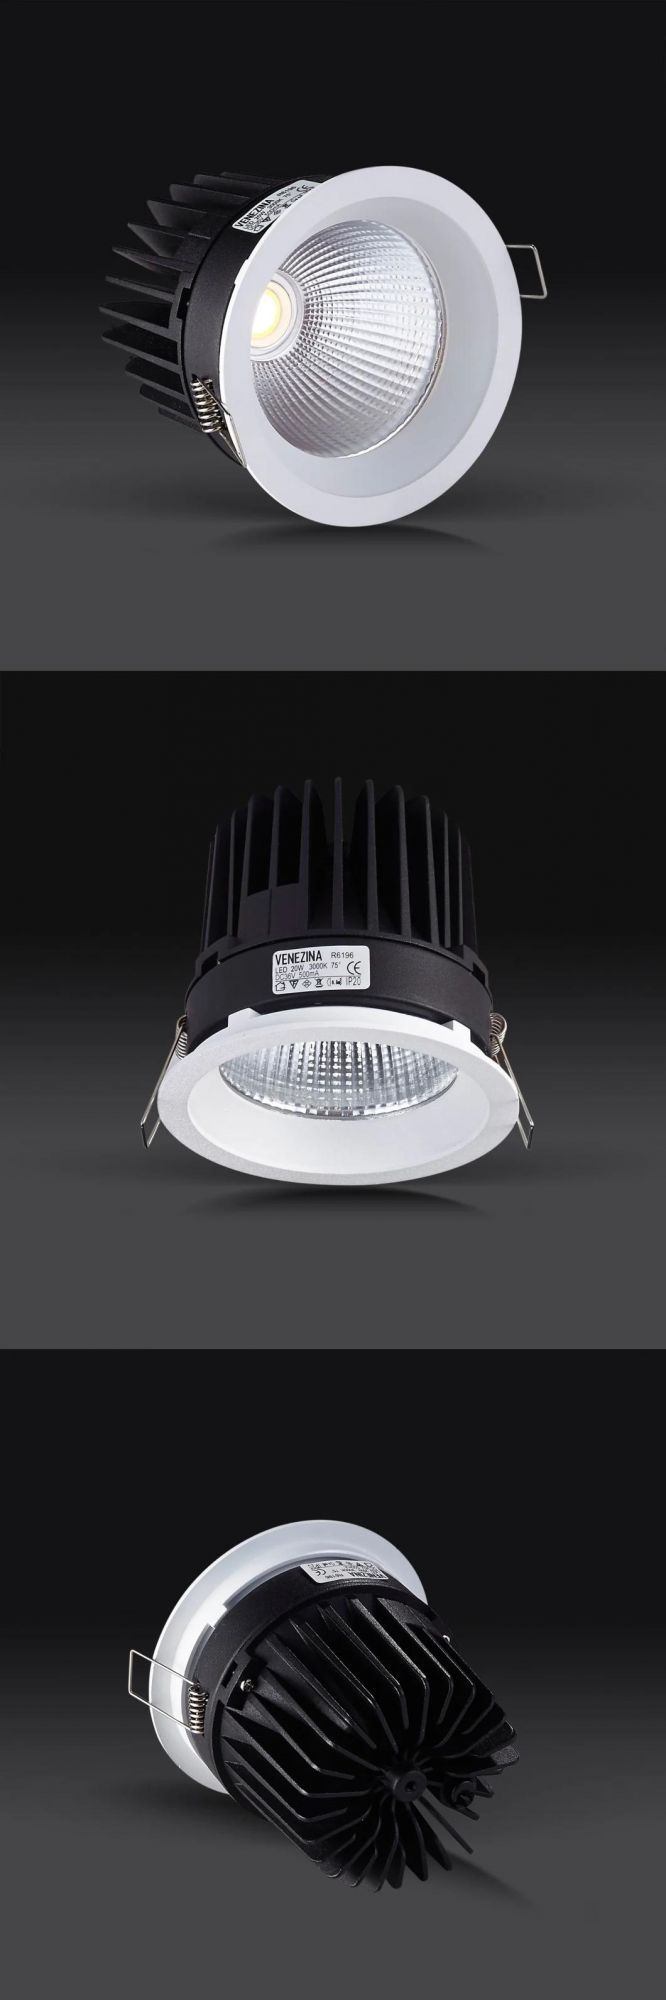 Popular Style COB 10W IP44 Commercial High Quality LED Downlight with a High Efficiency Reflector